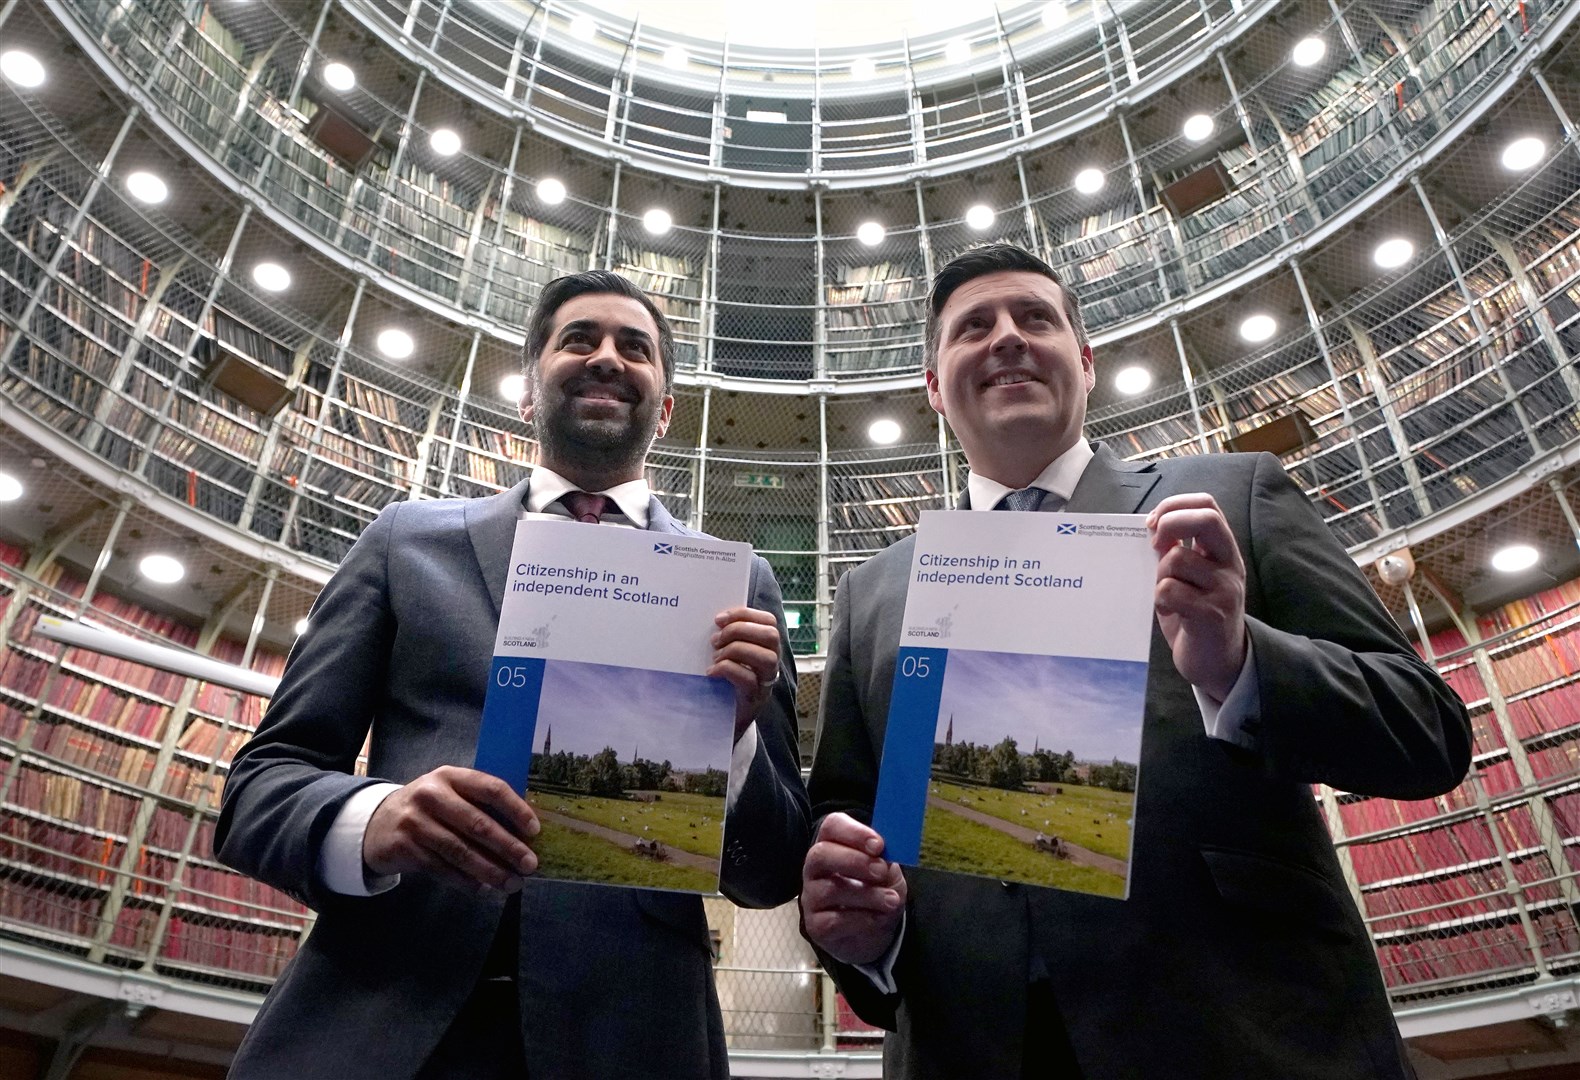 First Minister Humza Yousaf with Jamie Hepburn, Minister for Independence, at the launch of a policy paper on citizenship in an independent Scotland (Andrew Milligan/PA)